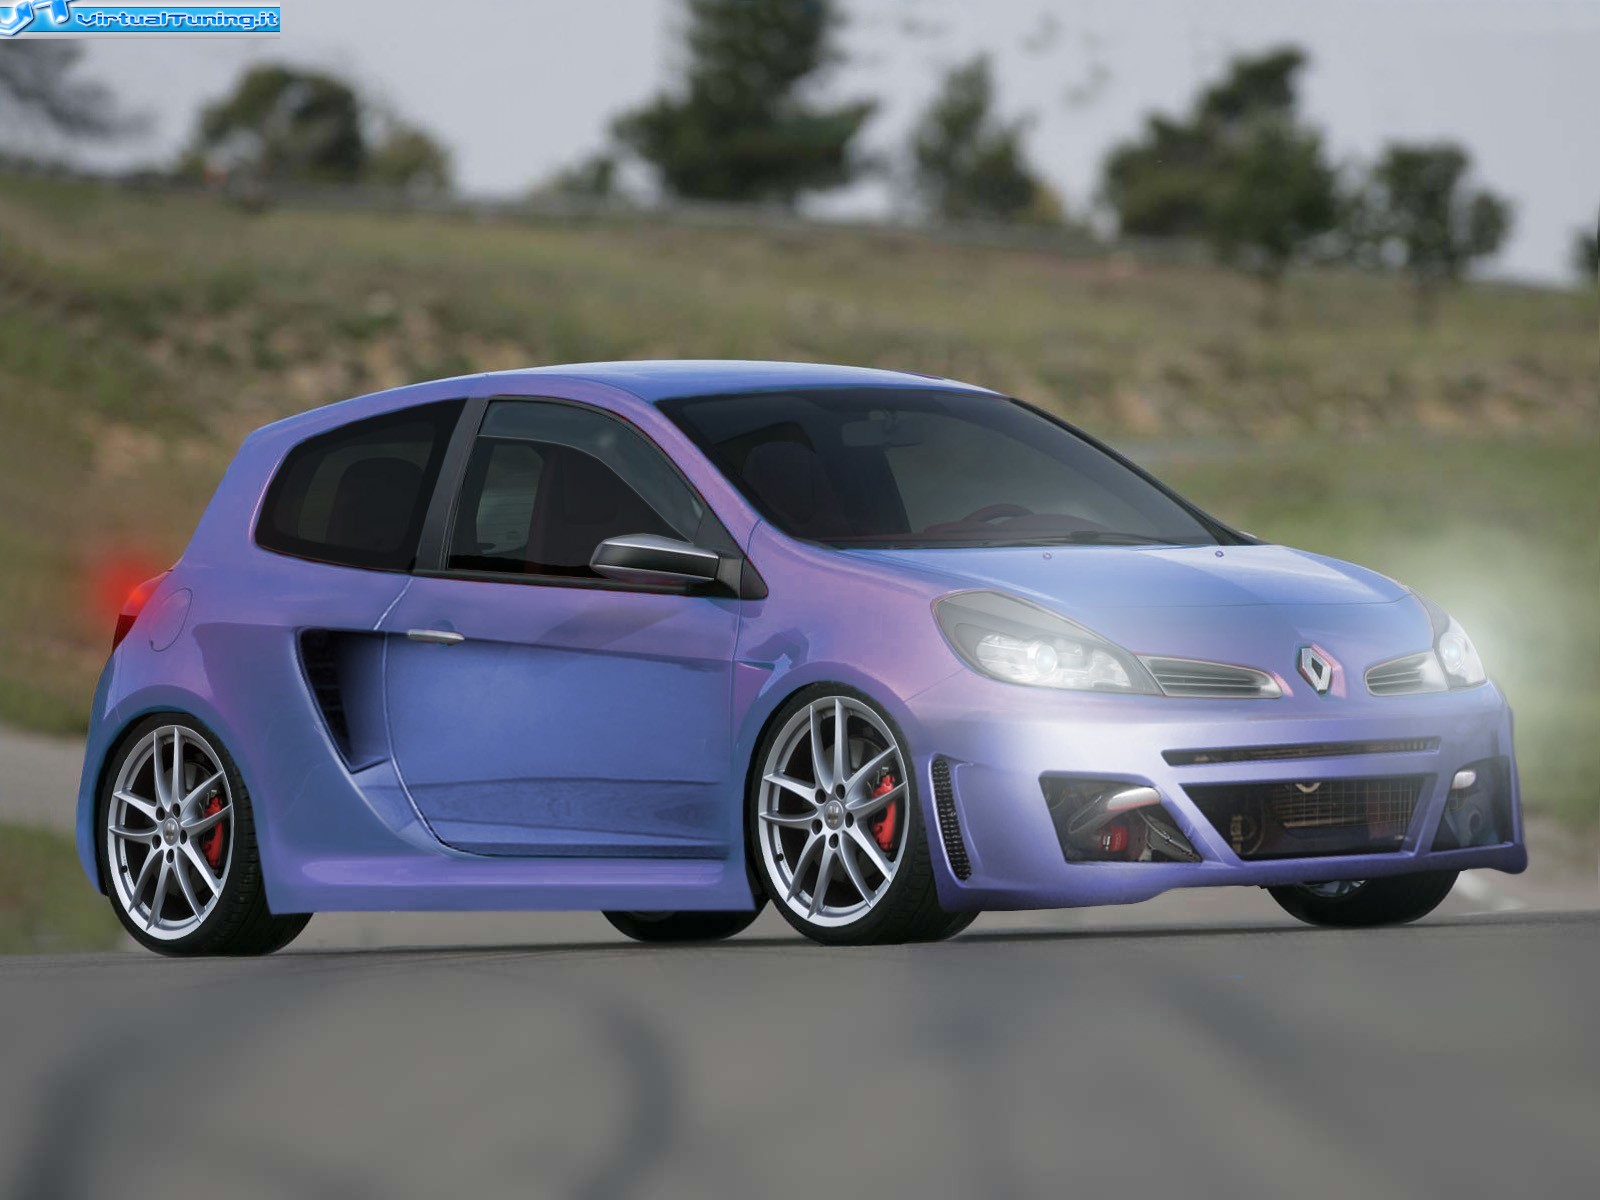 Renault Clio Rs By Amodio Tuning Virtualtuning It